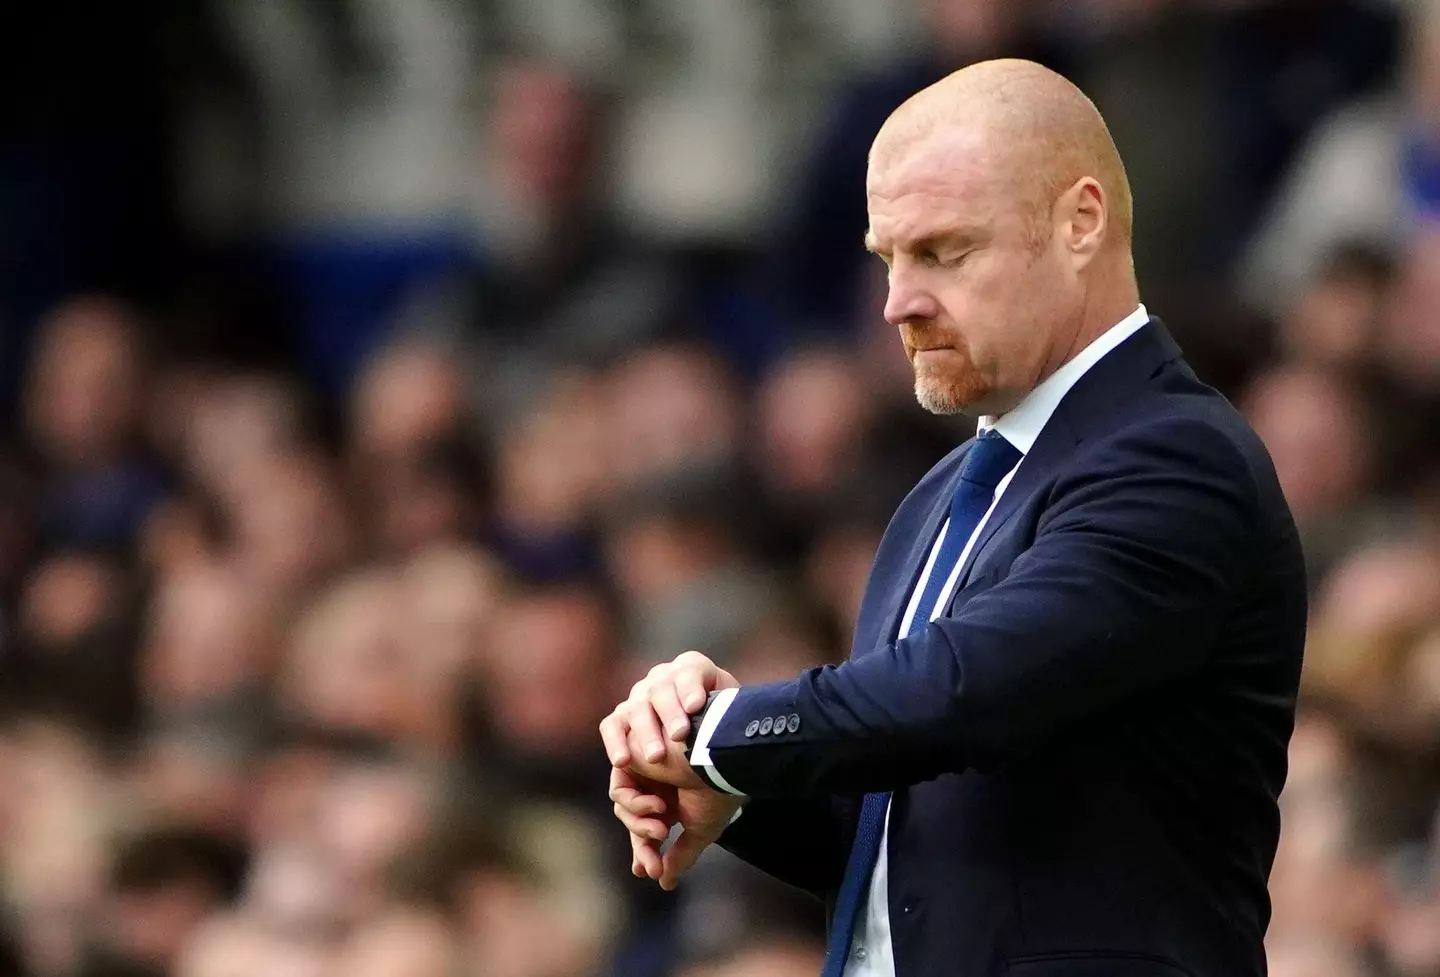 Dyche on the touchline. (Image